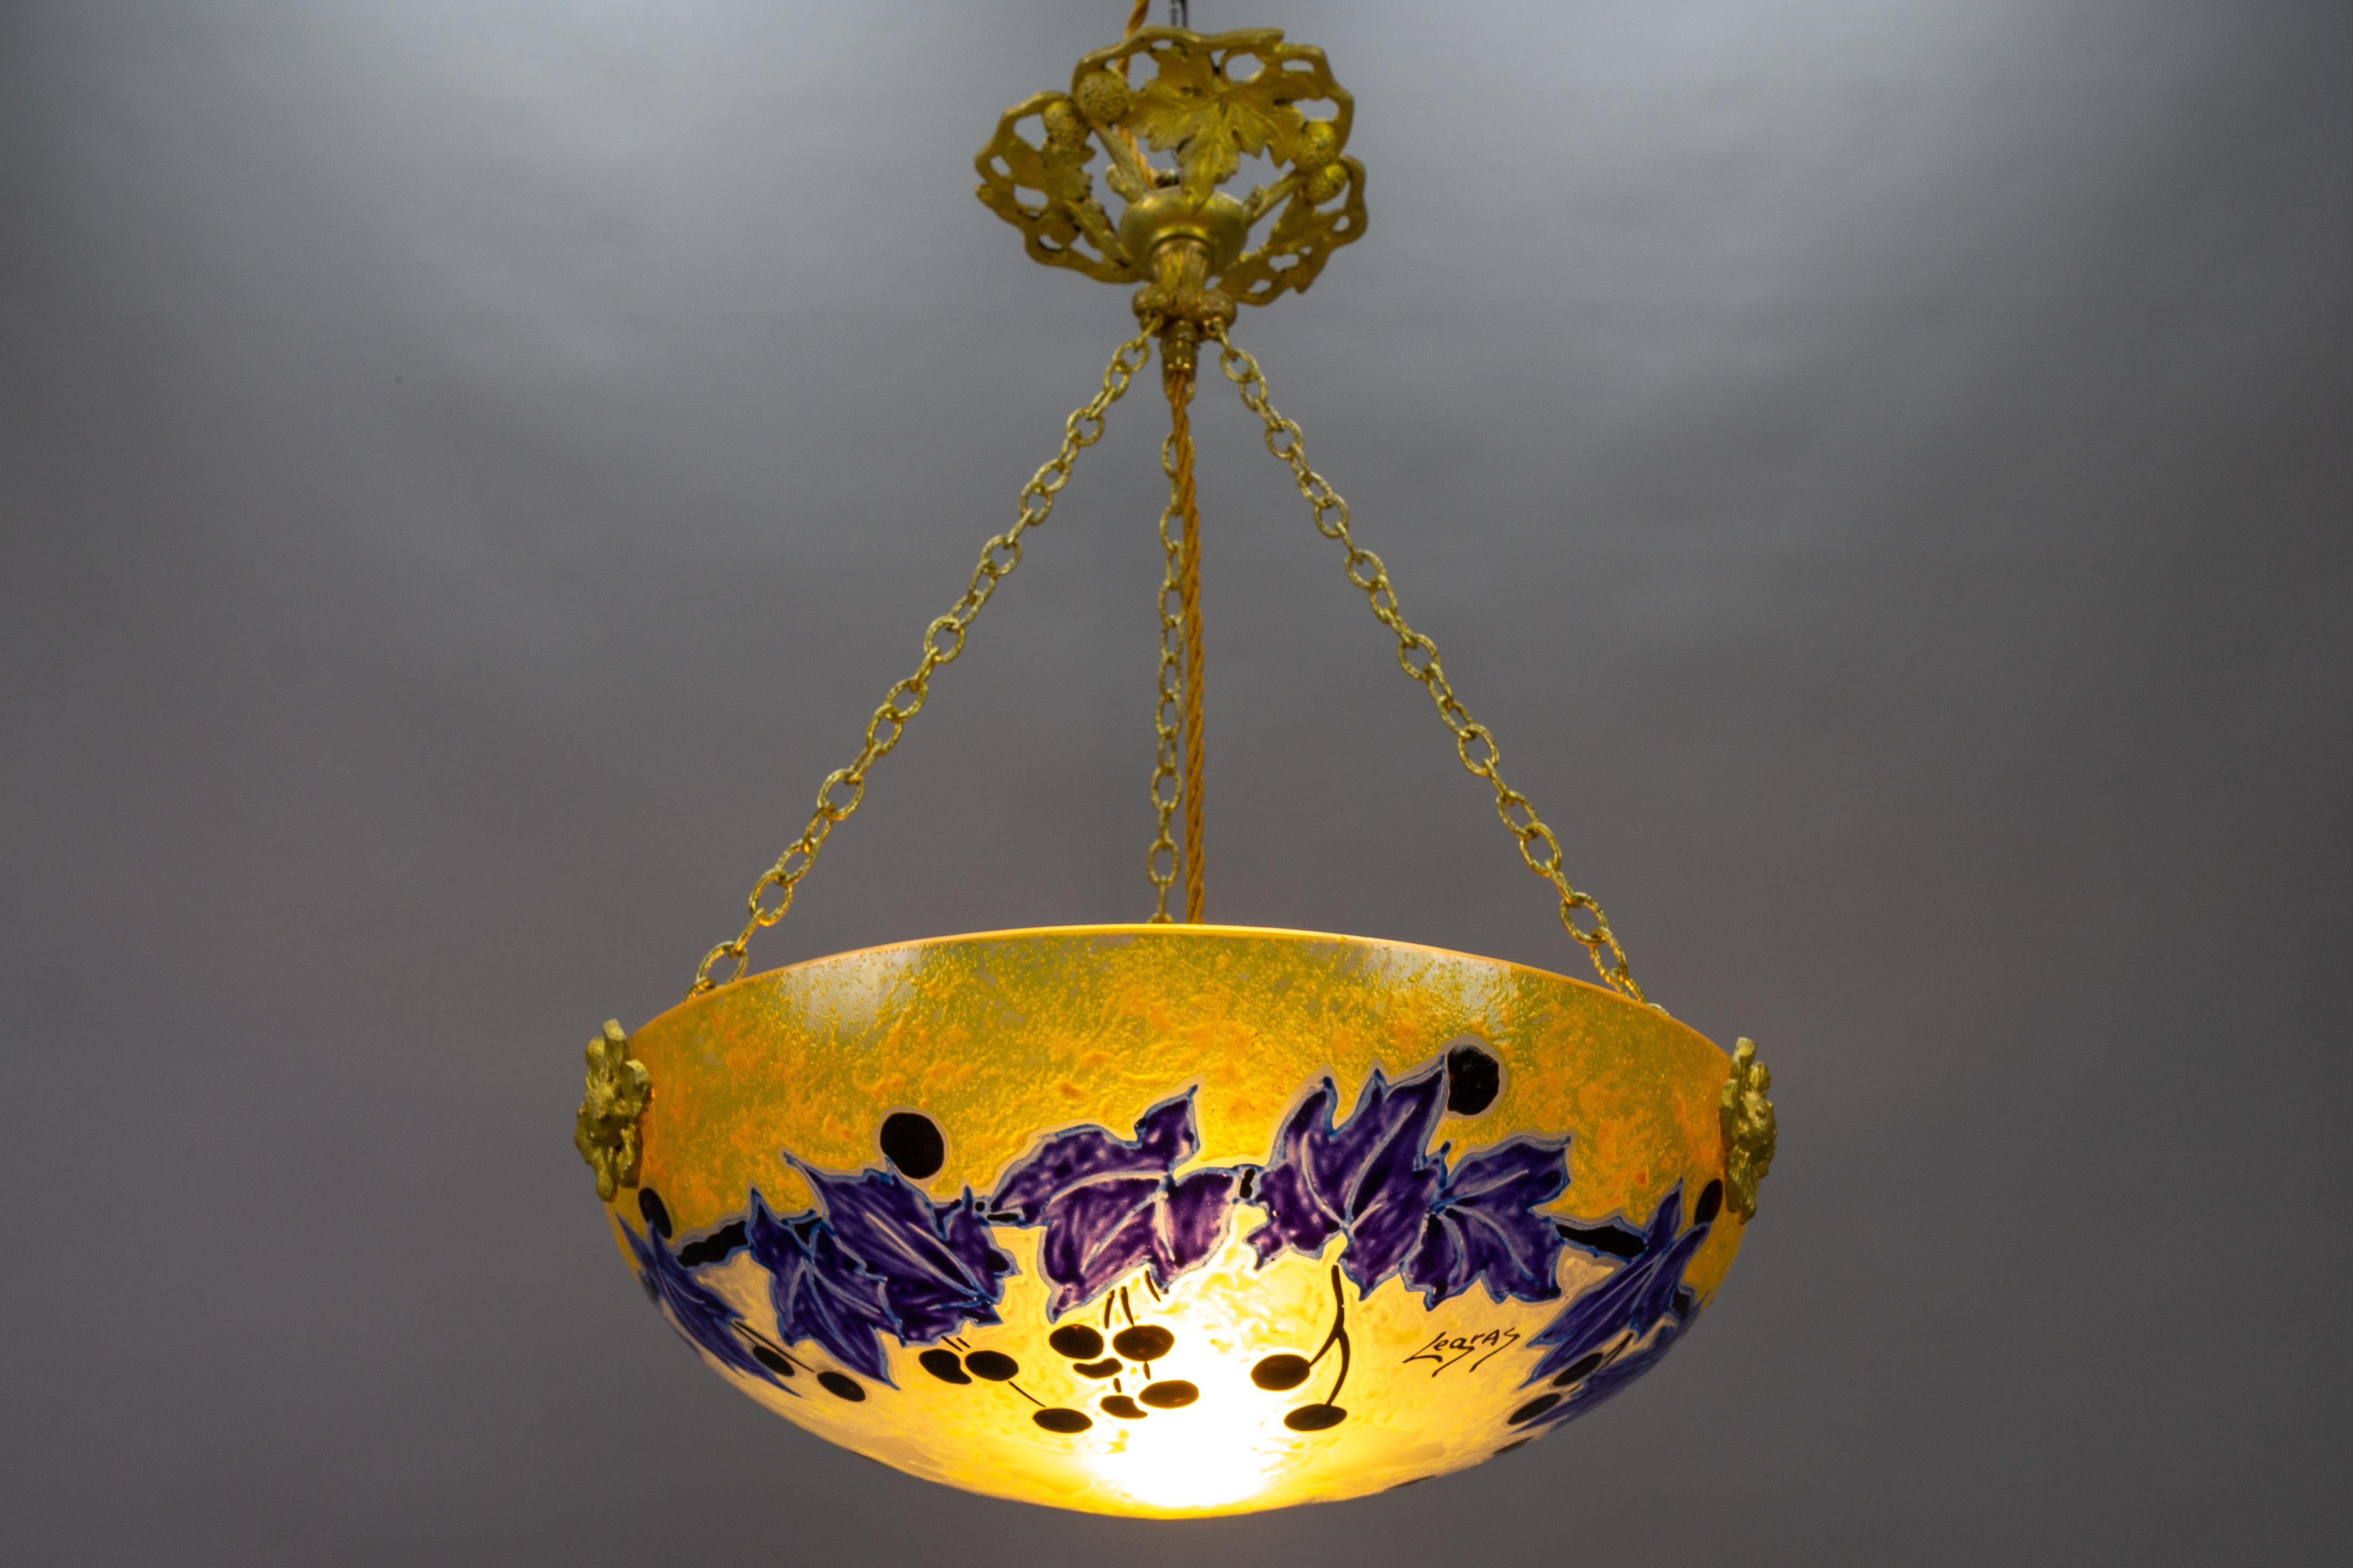 Hand-Painted French Art Nouveau Pendant Light with Yellow and Blue Glass Ivy Motifs by Legras For Sale